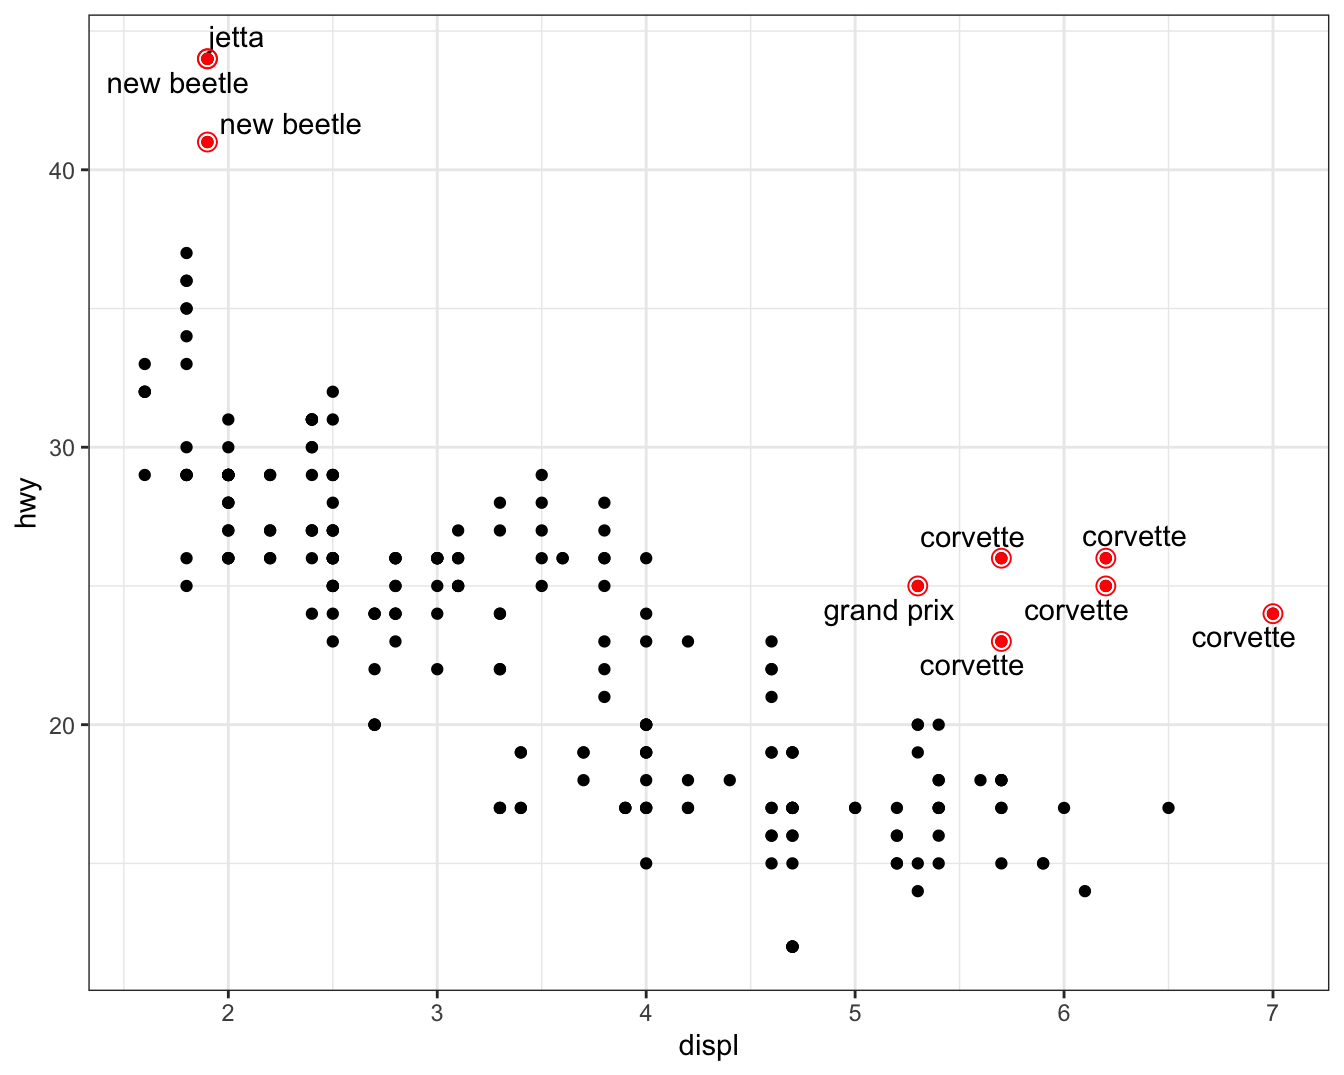 Scatterplot of highway fuel efficiency versus engine size of cars. Points
where highway mileage is above 40 as well as above 20 with engine size
above 5 are red, with a hollow red circle, and labelled with model name
of the car.